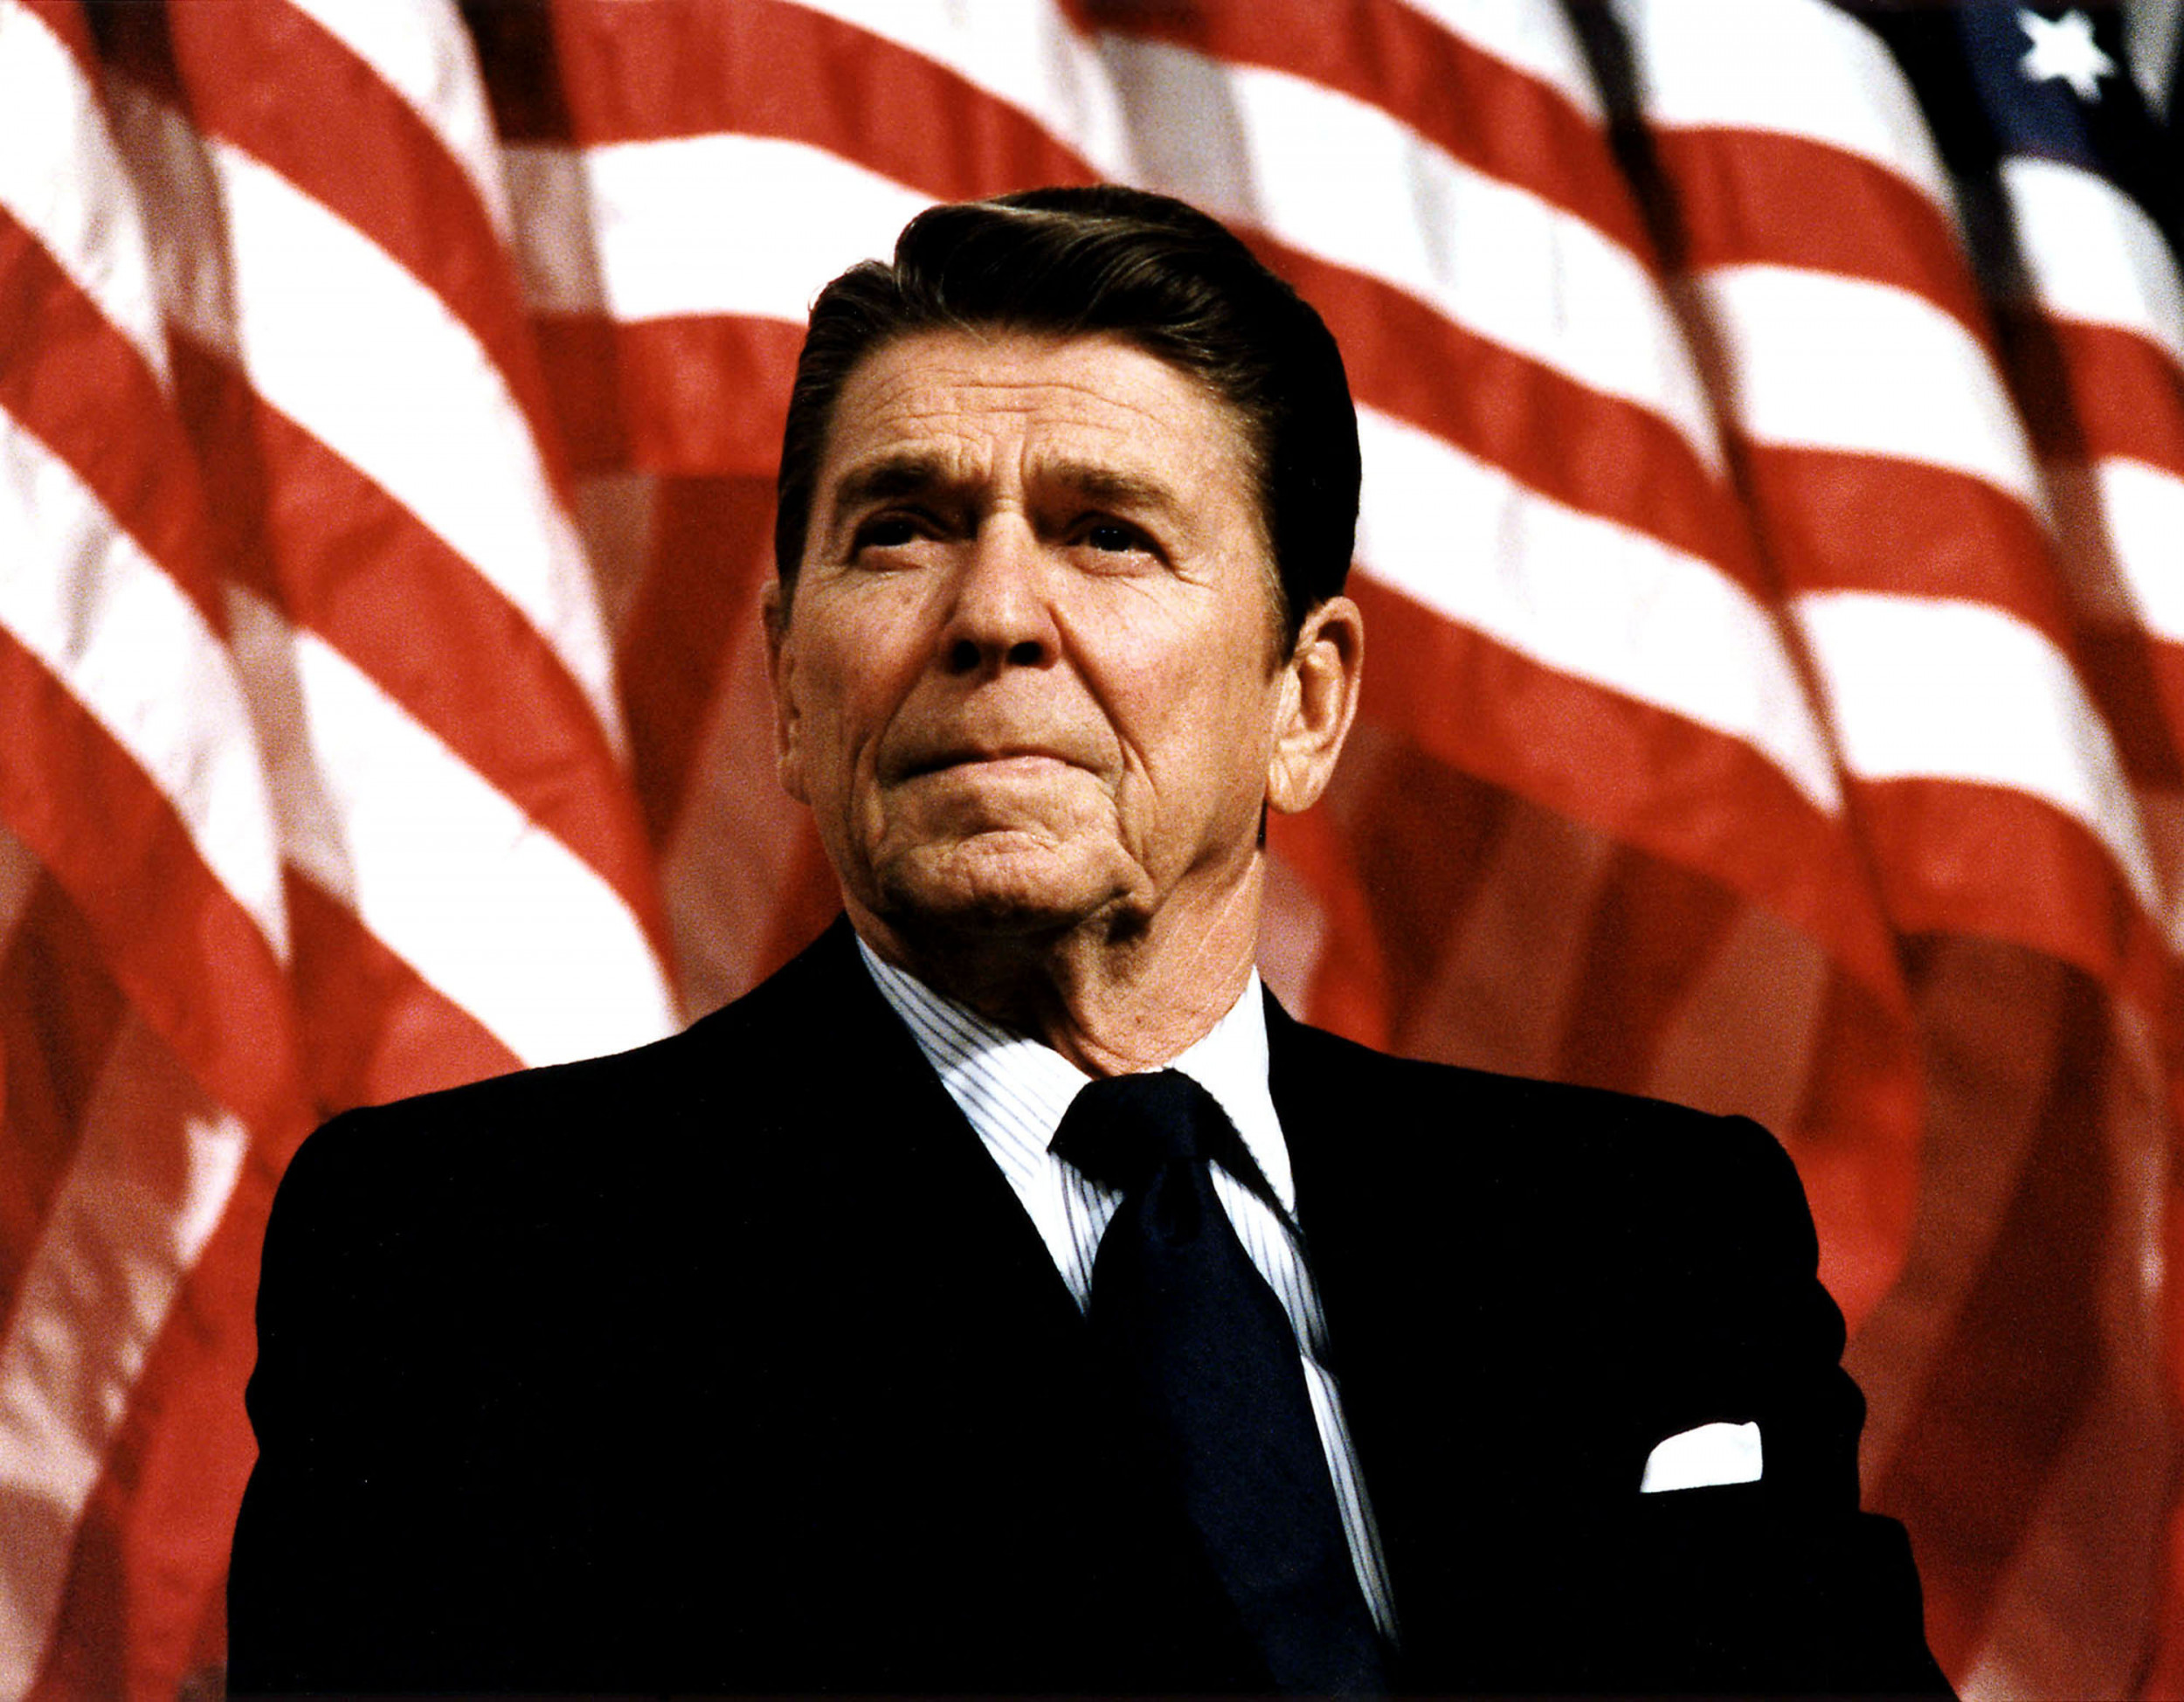 We Are Facing a Post-Pandemic Downturn. What Would Reagan Do?